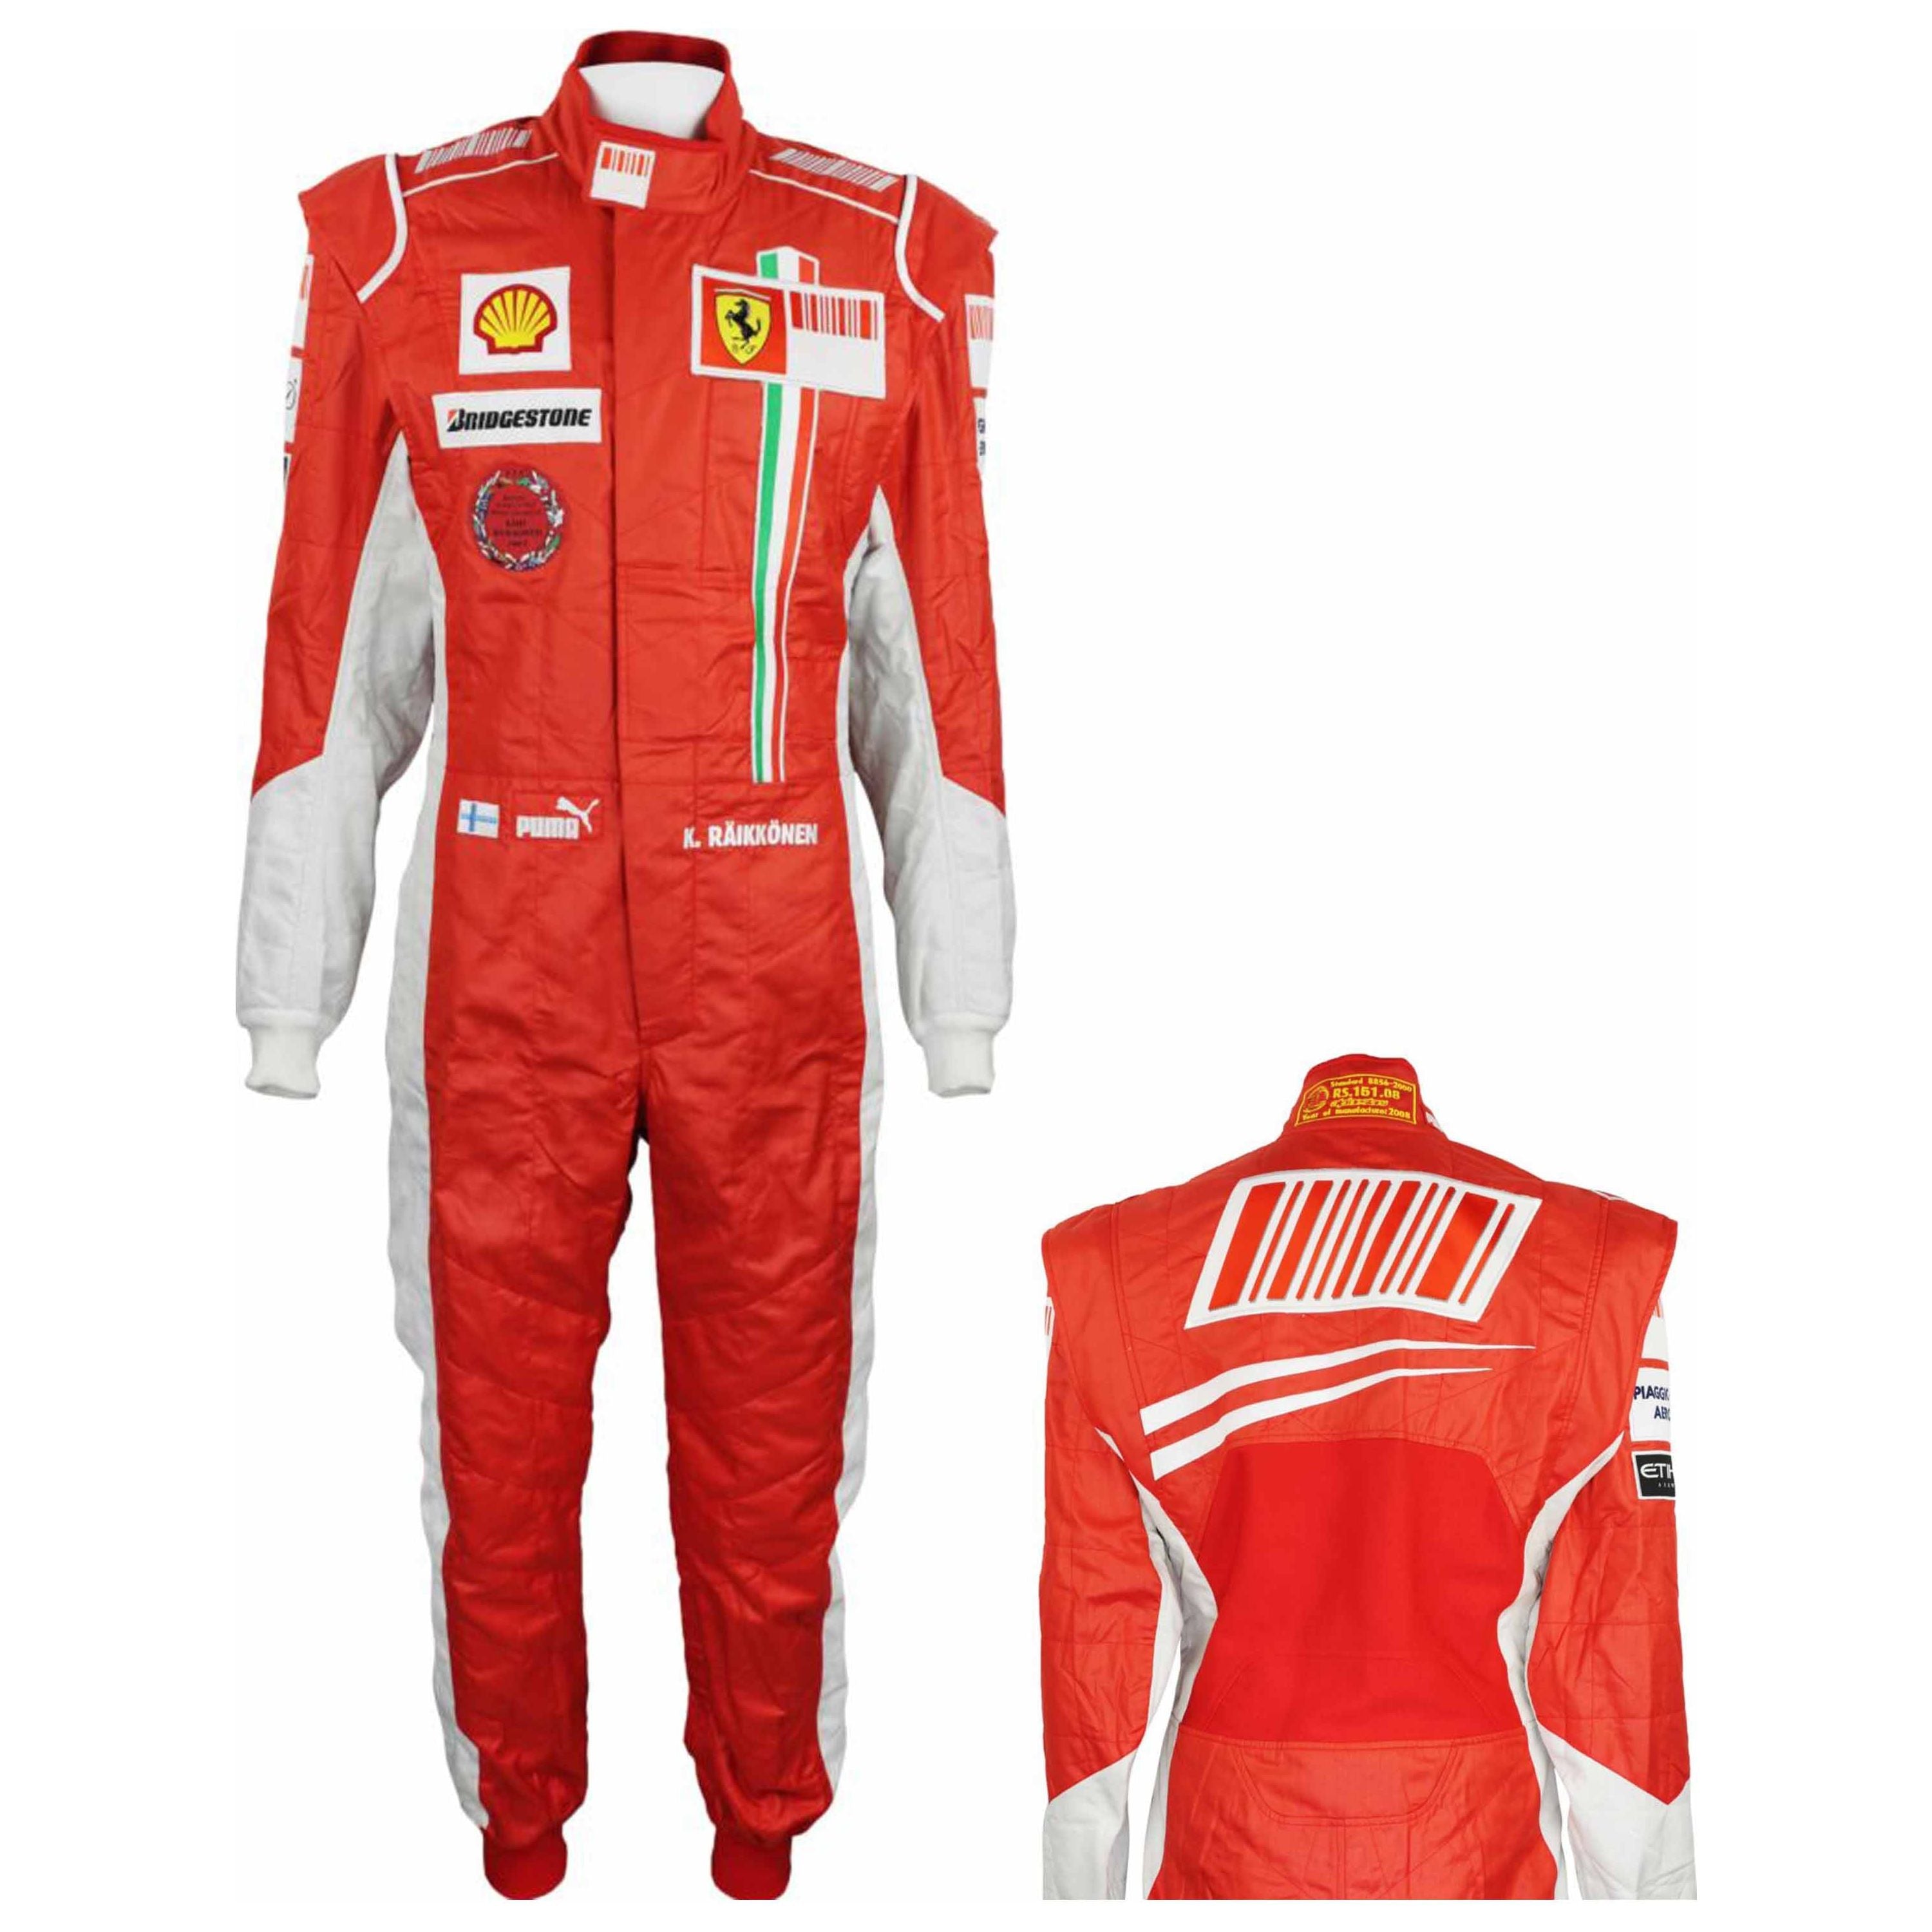 Go kart racing Sublimation Protective clothing Racing gear Suit NN-046